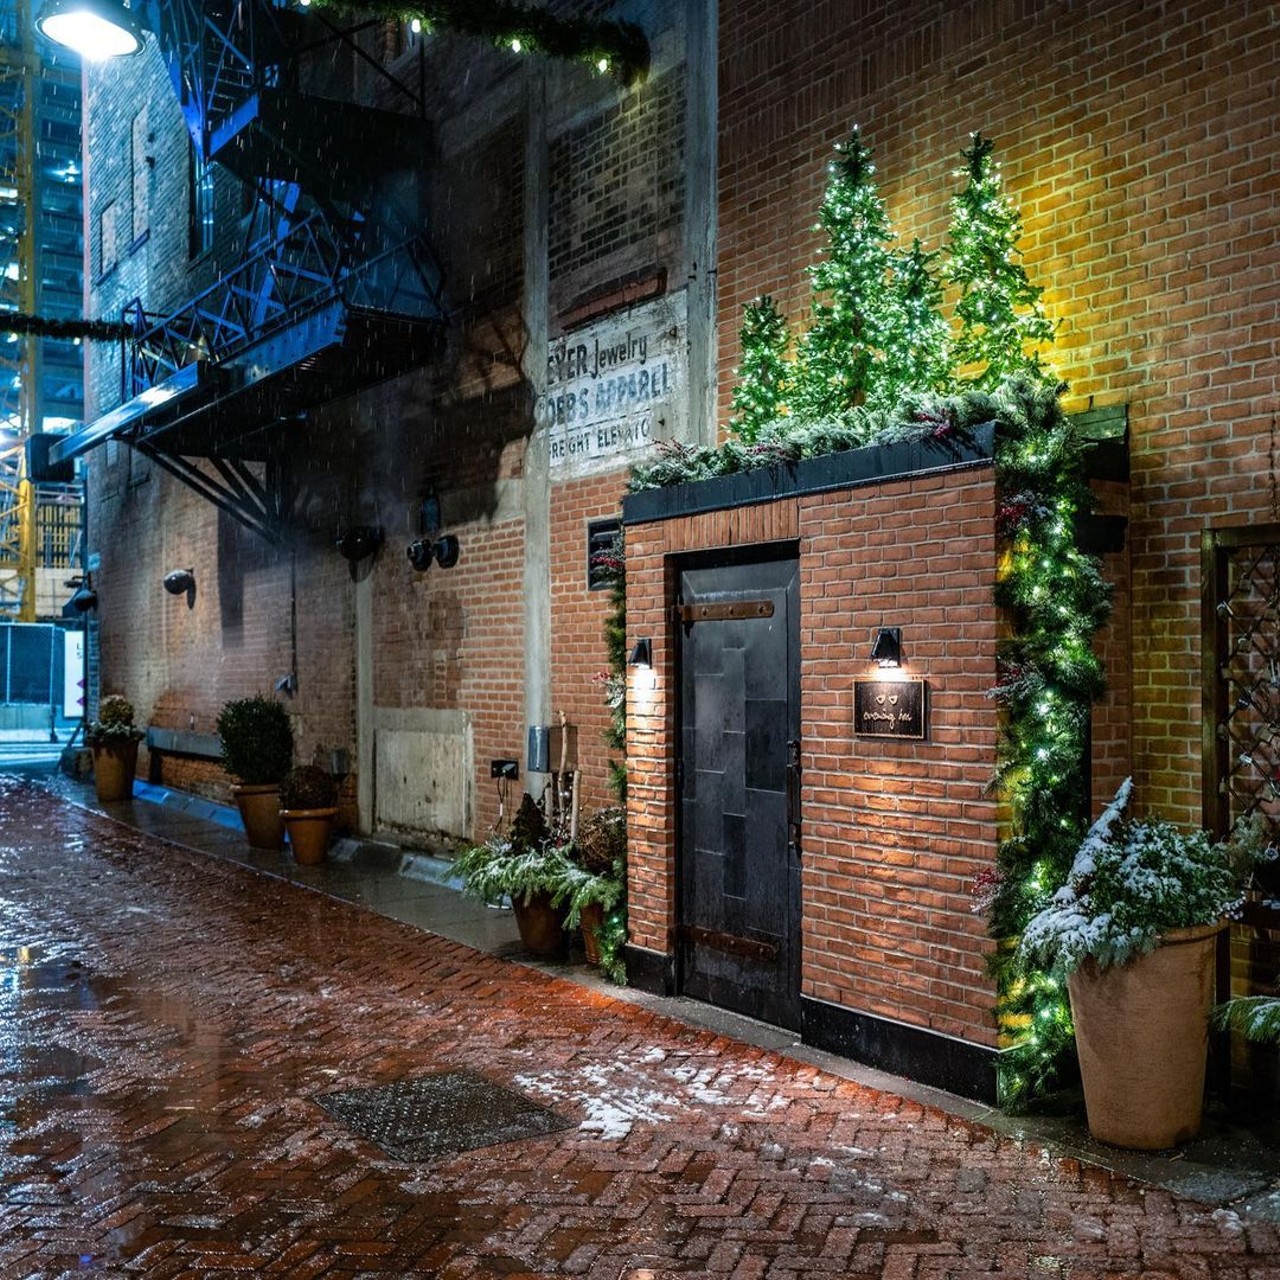 Evening Bar
1400 Woodward Ave, Detroit; eveningbar.com
This speakeasy-style bar is accessible through a hidden entrance in Parker Alley behind the Shinola Hotel. The relaxed, subdued atmosphere is complemented by a delicious drink menu that recalls the classic elegance of the Roaring Twenties.  
Photo via @rod.arroyo / Instagram